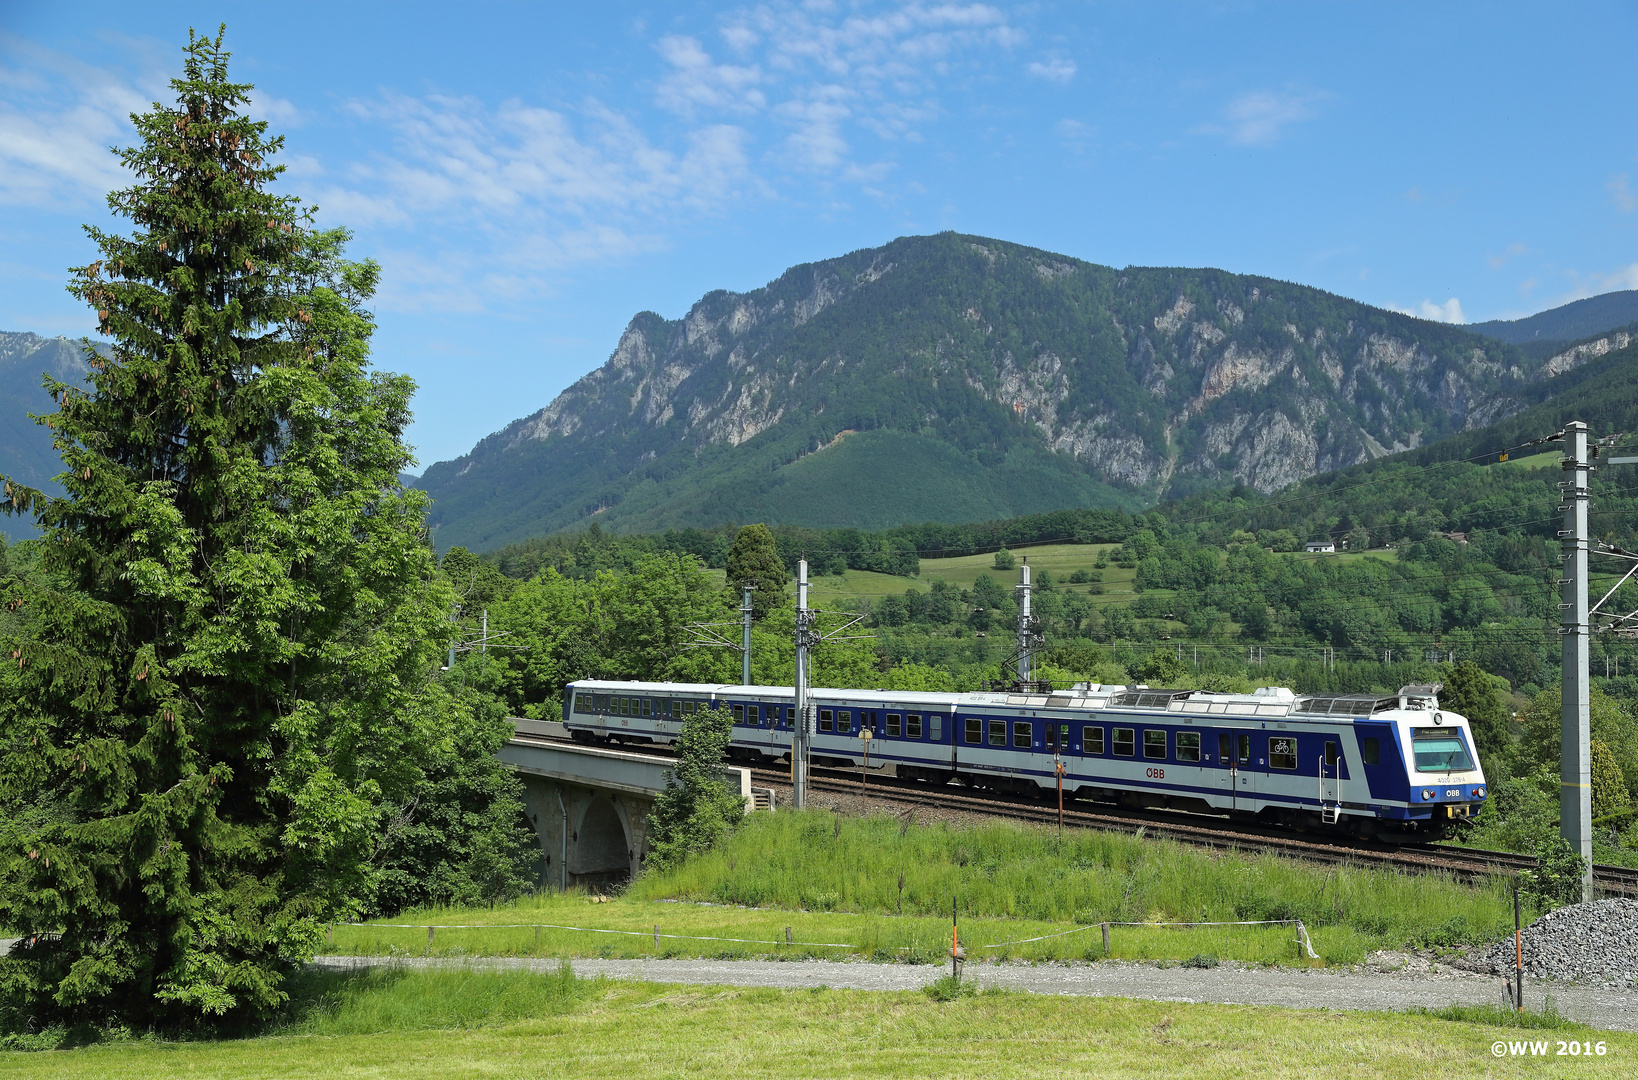 4020 276 in Payerbach